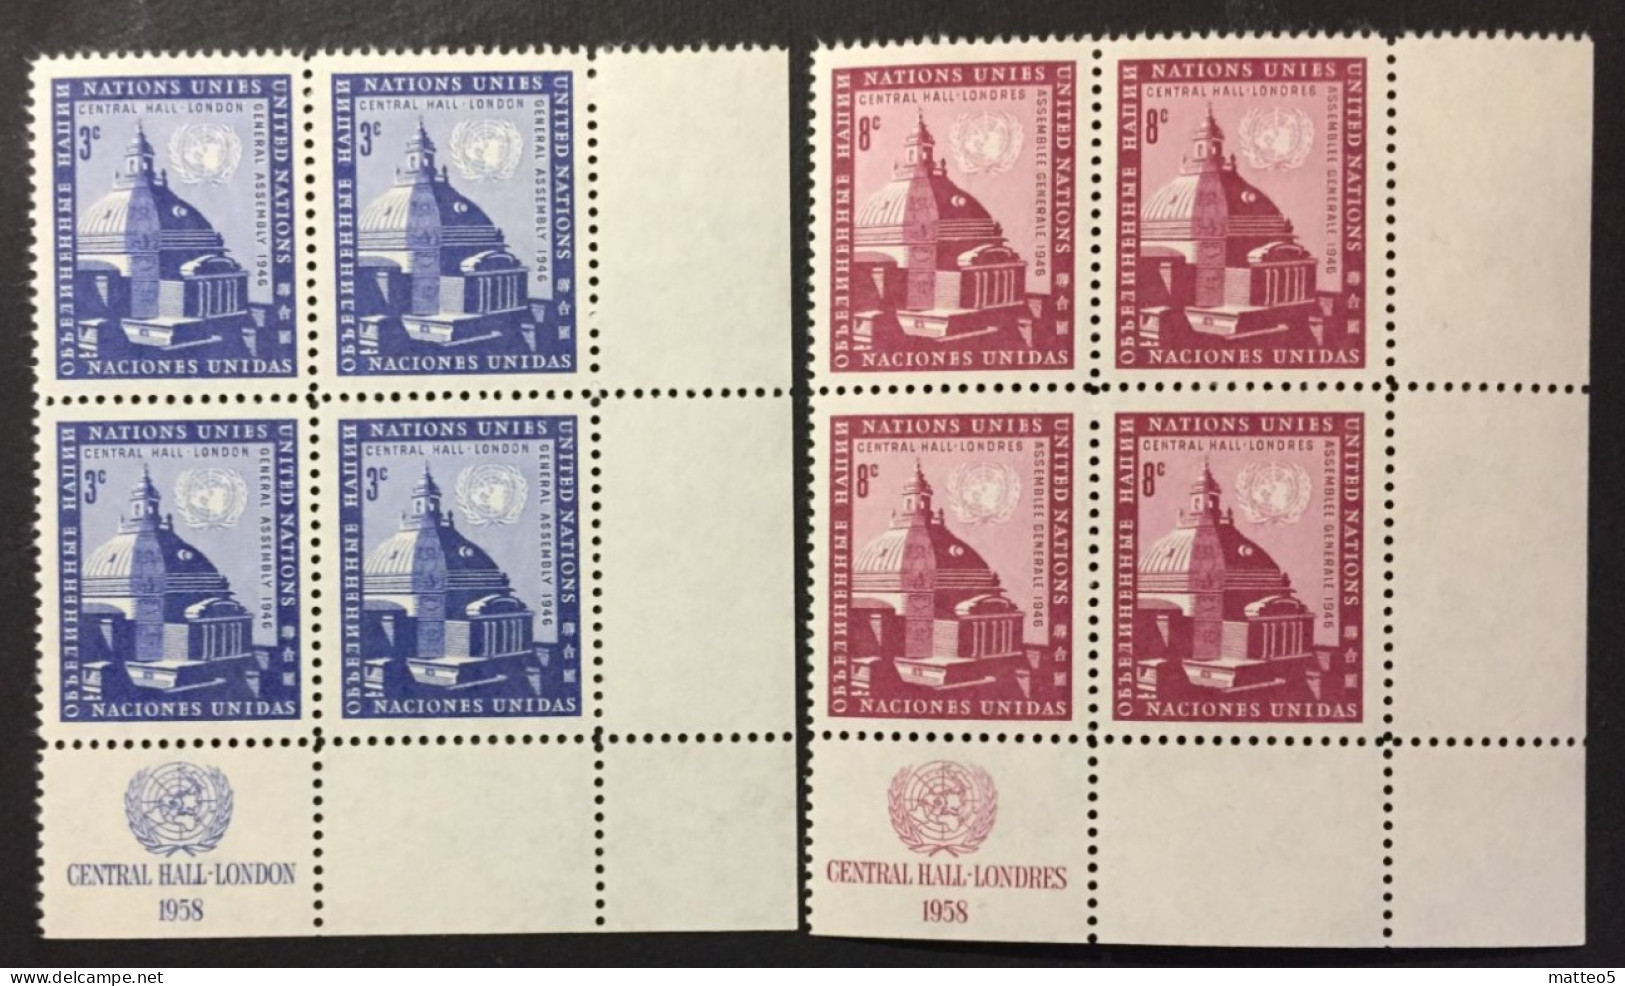 1958 - United Nations UNO UN ONU - General Assembly, UNN Assembly Buildings - 2 X4 Stamps Unused - Neufs